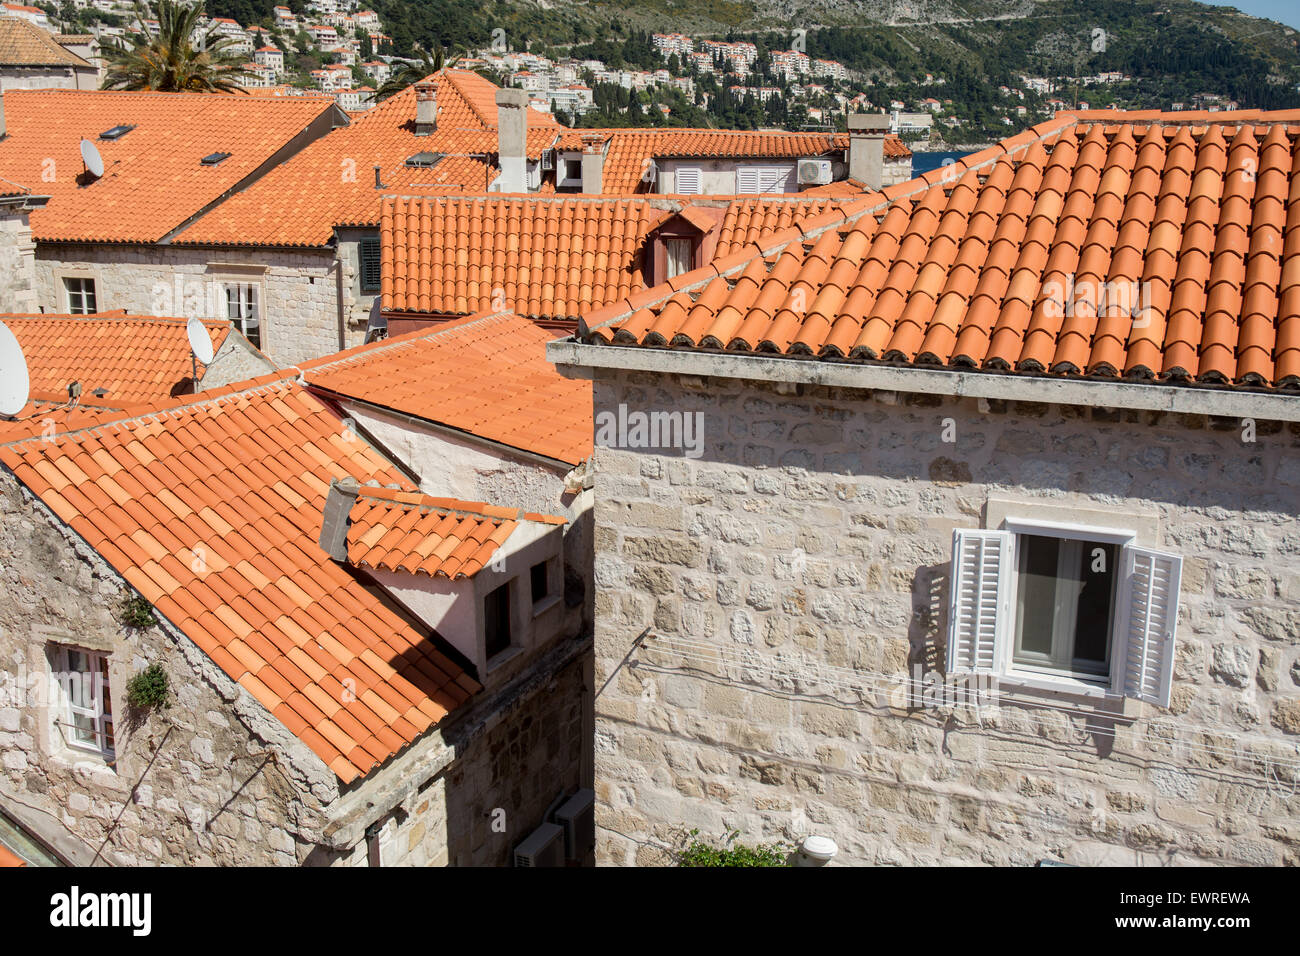 colourful tile rooftops and buildings inside old city wall, dubrovnik, croatia Stock Photo